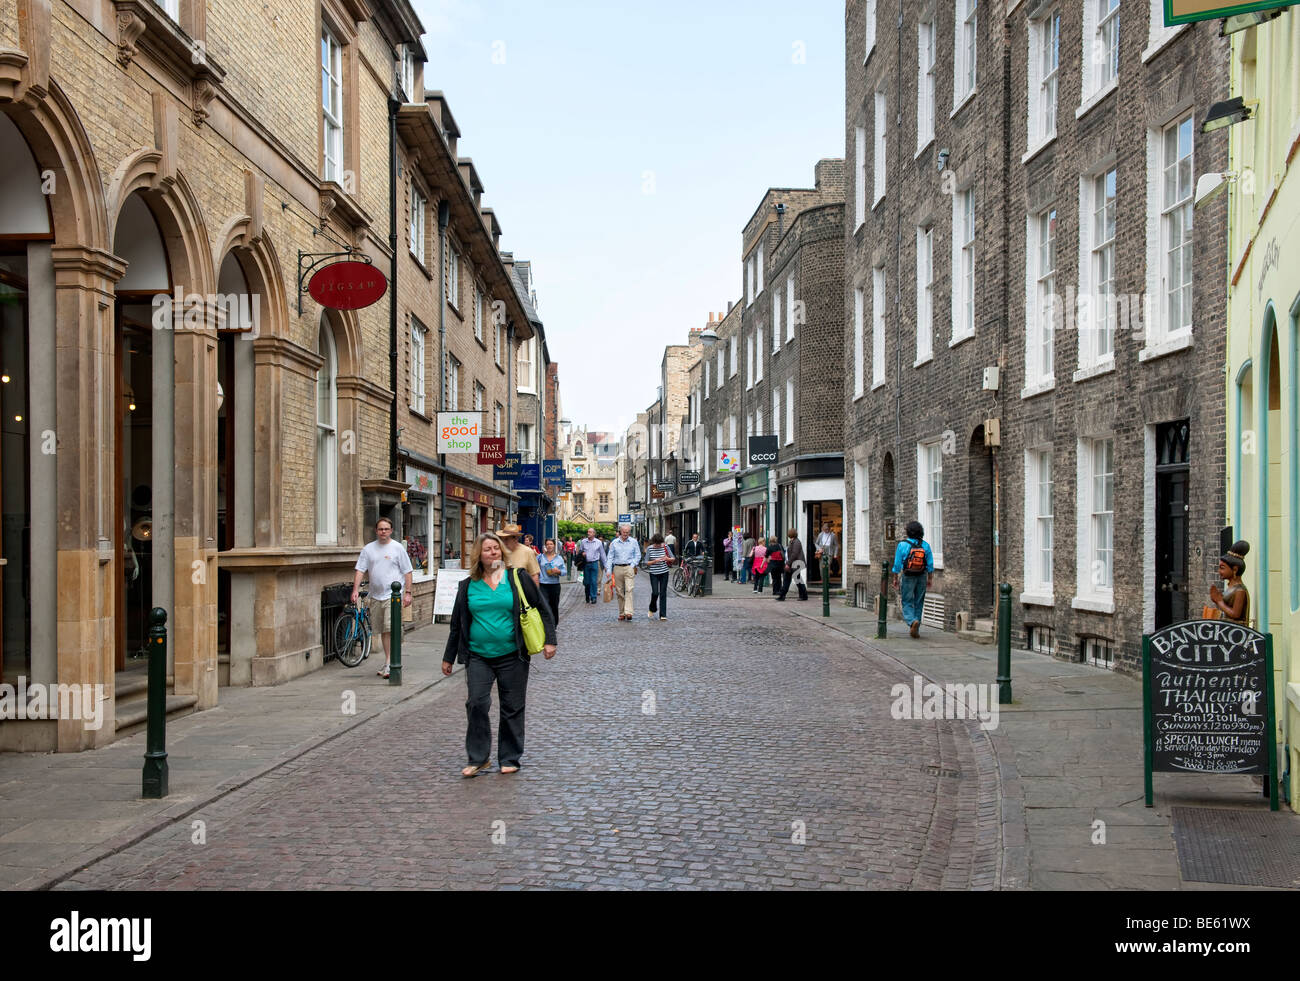 Shoppers and tourists milling around on Green Street in the centre of Cambridge, UK Stock Photo